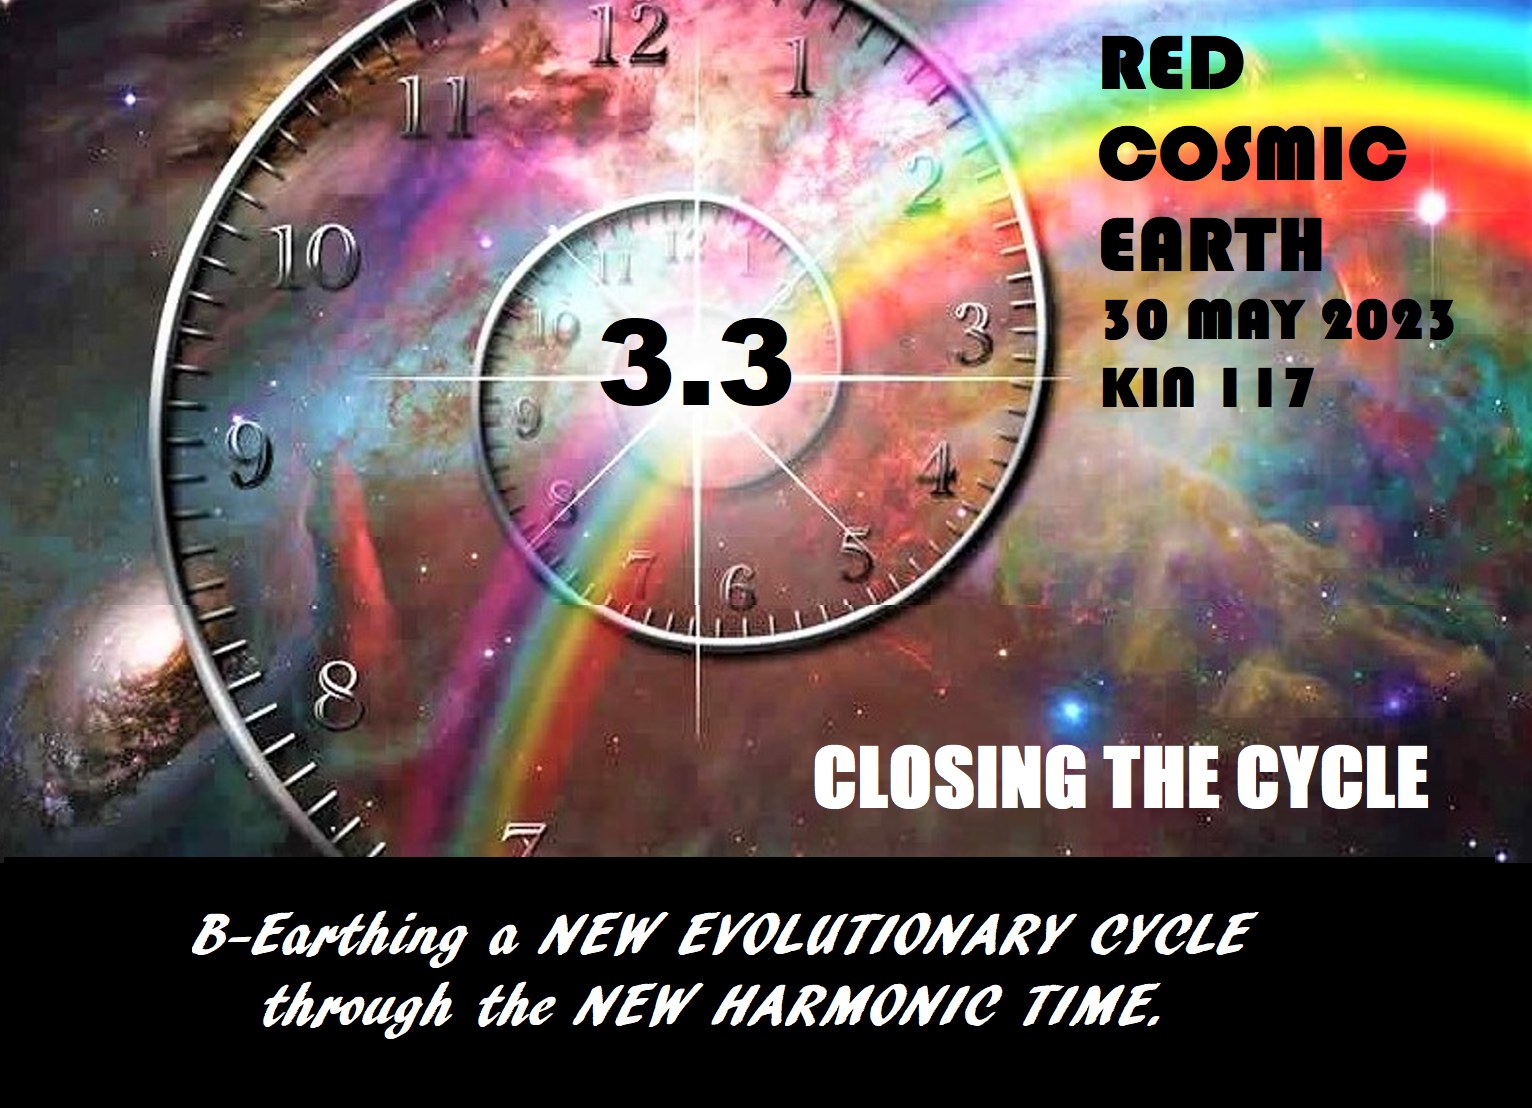 RED COSMIC EARTH